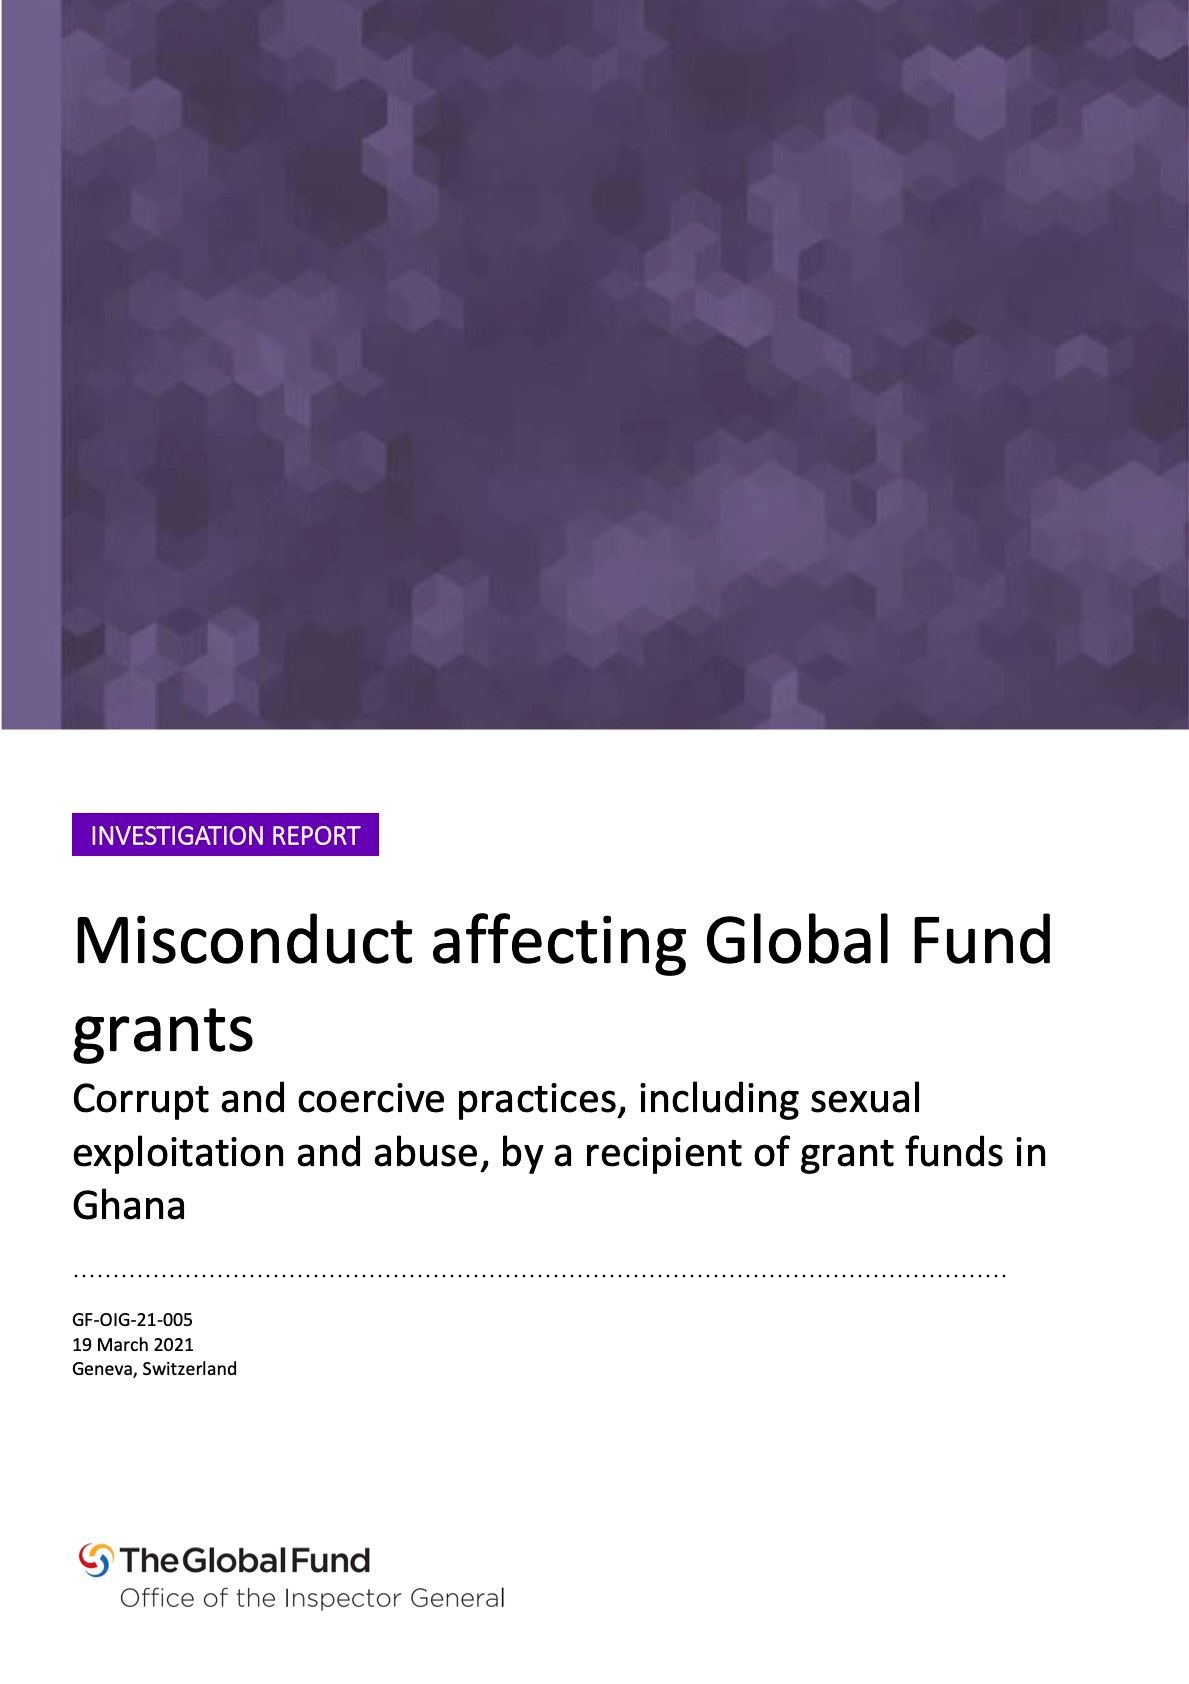 Misconduct Affecting Global Fund Grants